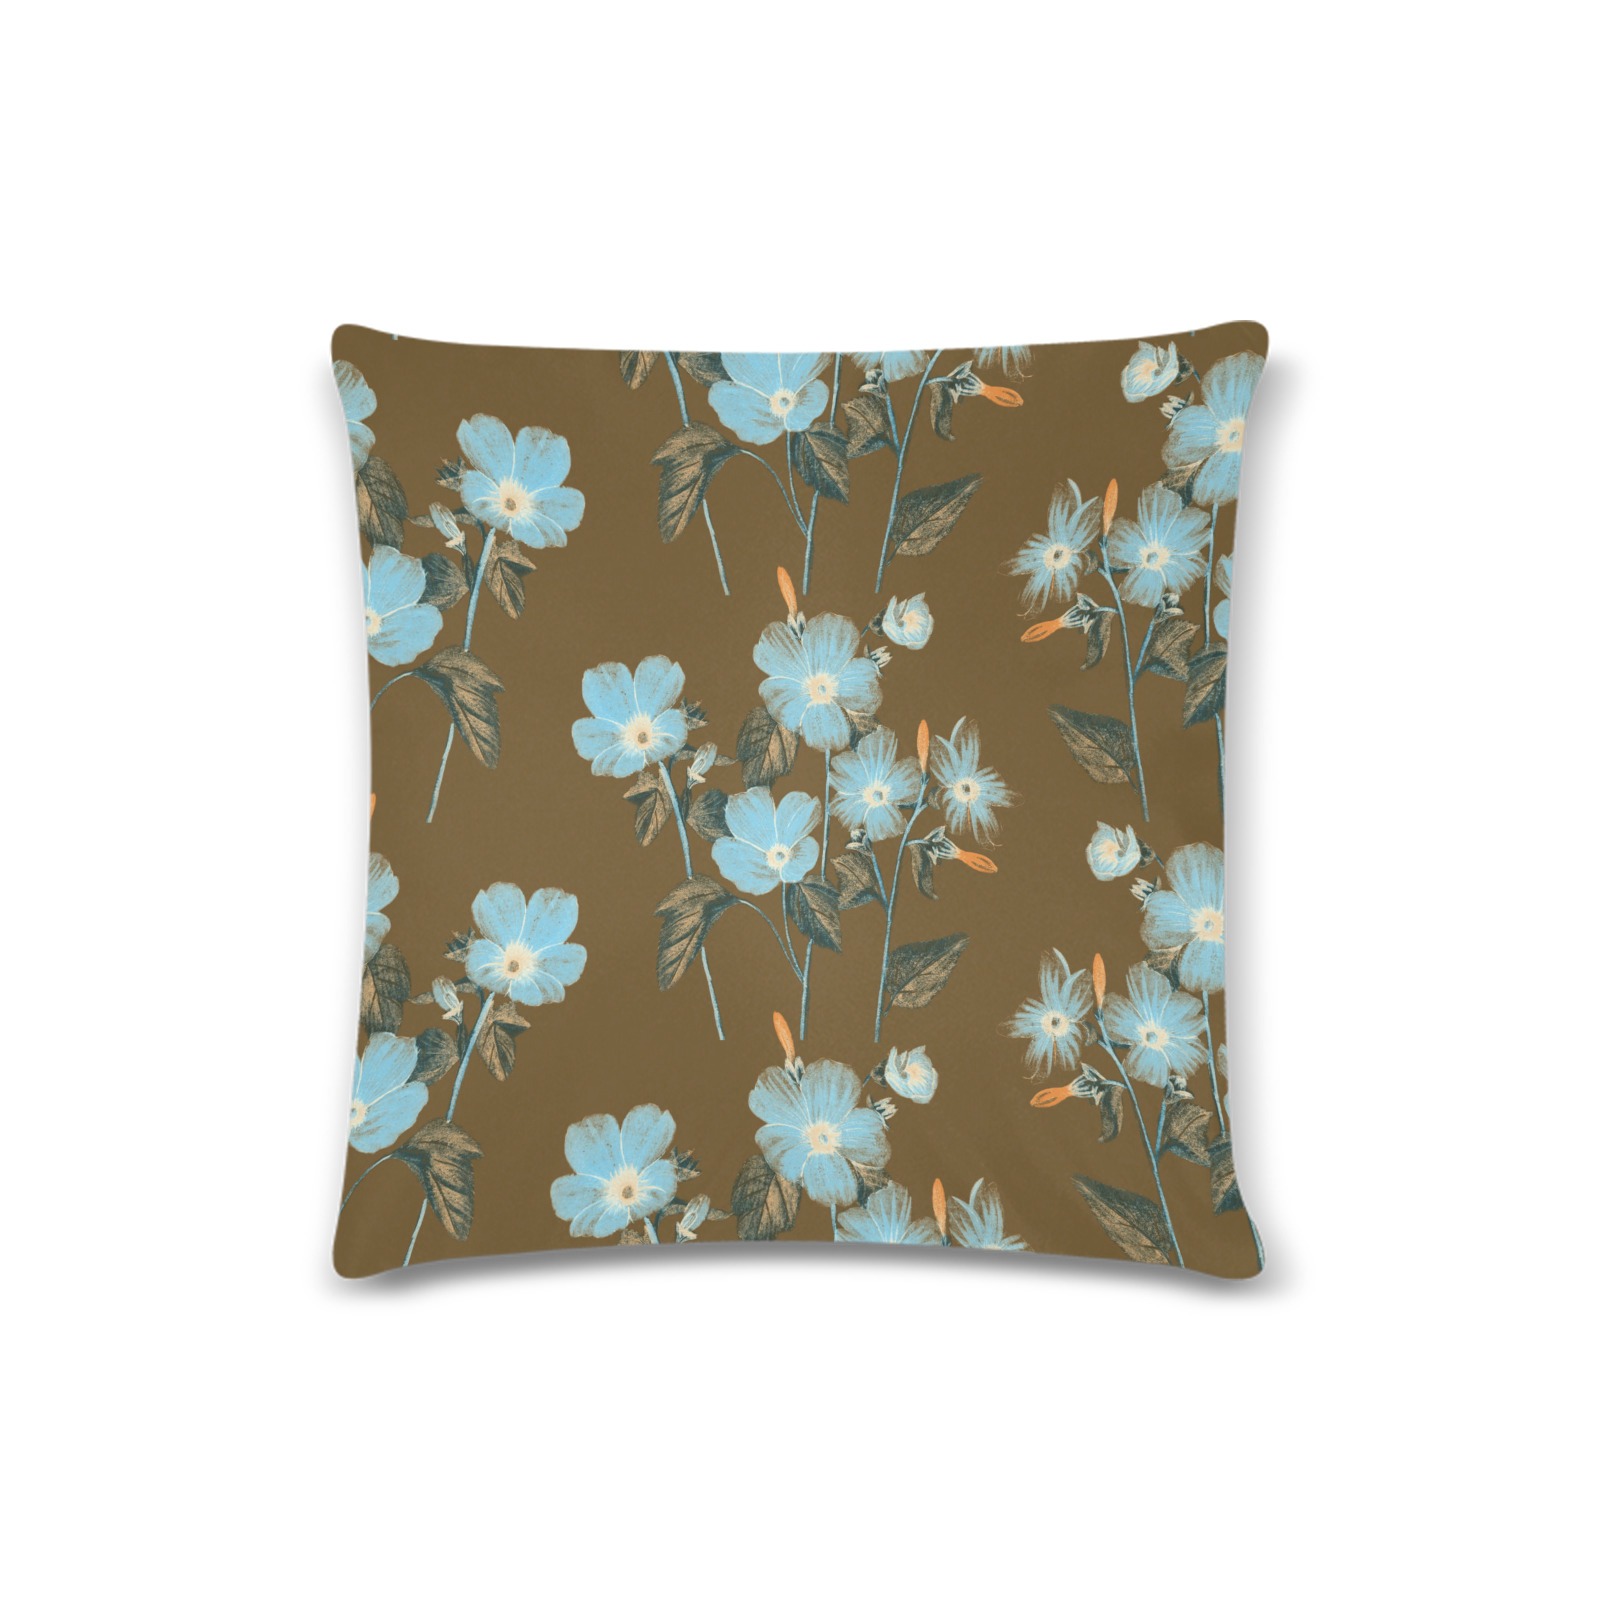 Rustic Blue Floral Bouquet Custom Zippered Pillow Case 16"x16" (one side)